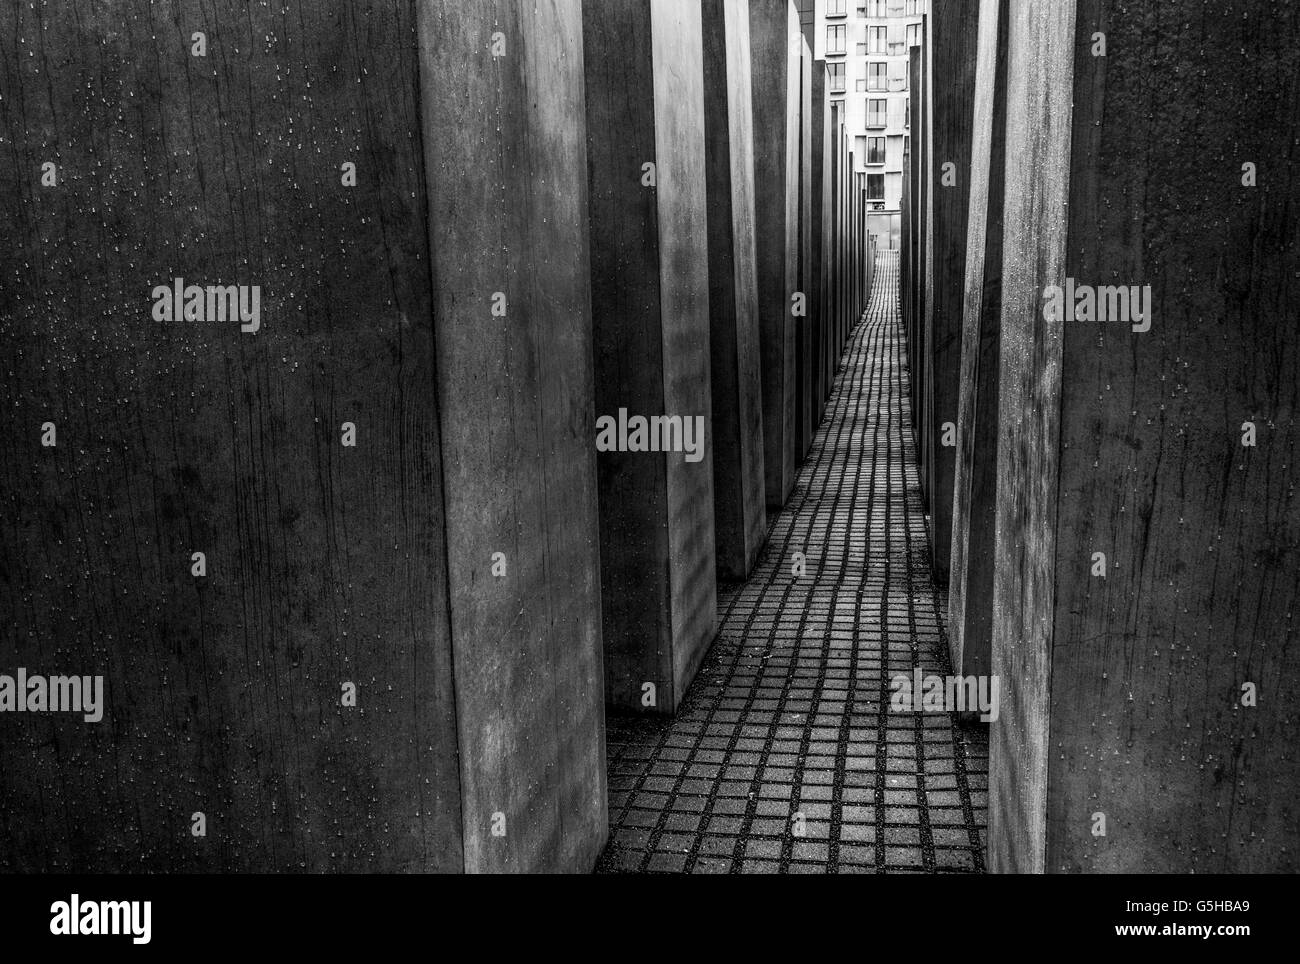 Memorial to the Murdered Jews of Europe or Holocaust Memorial, Berlin, Germany designed by Eisenman and engineer Buro Happold Stock Photo